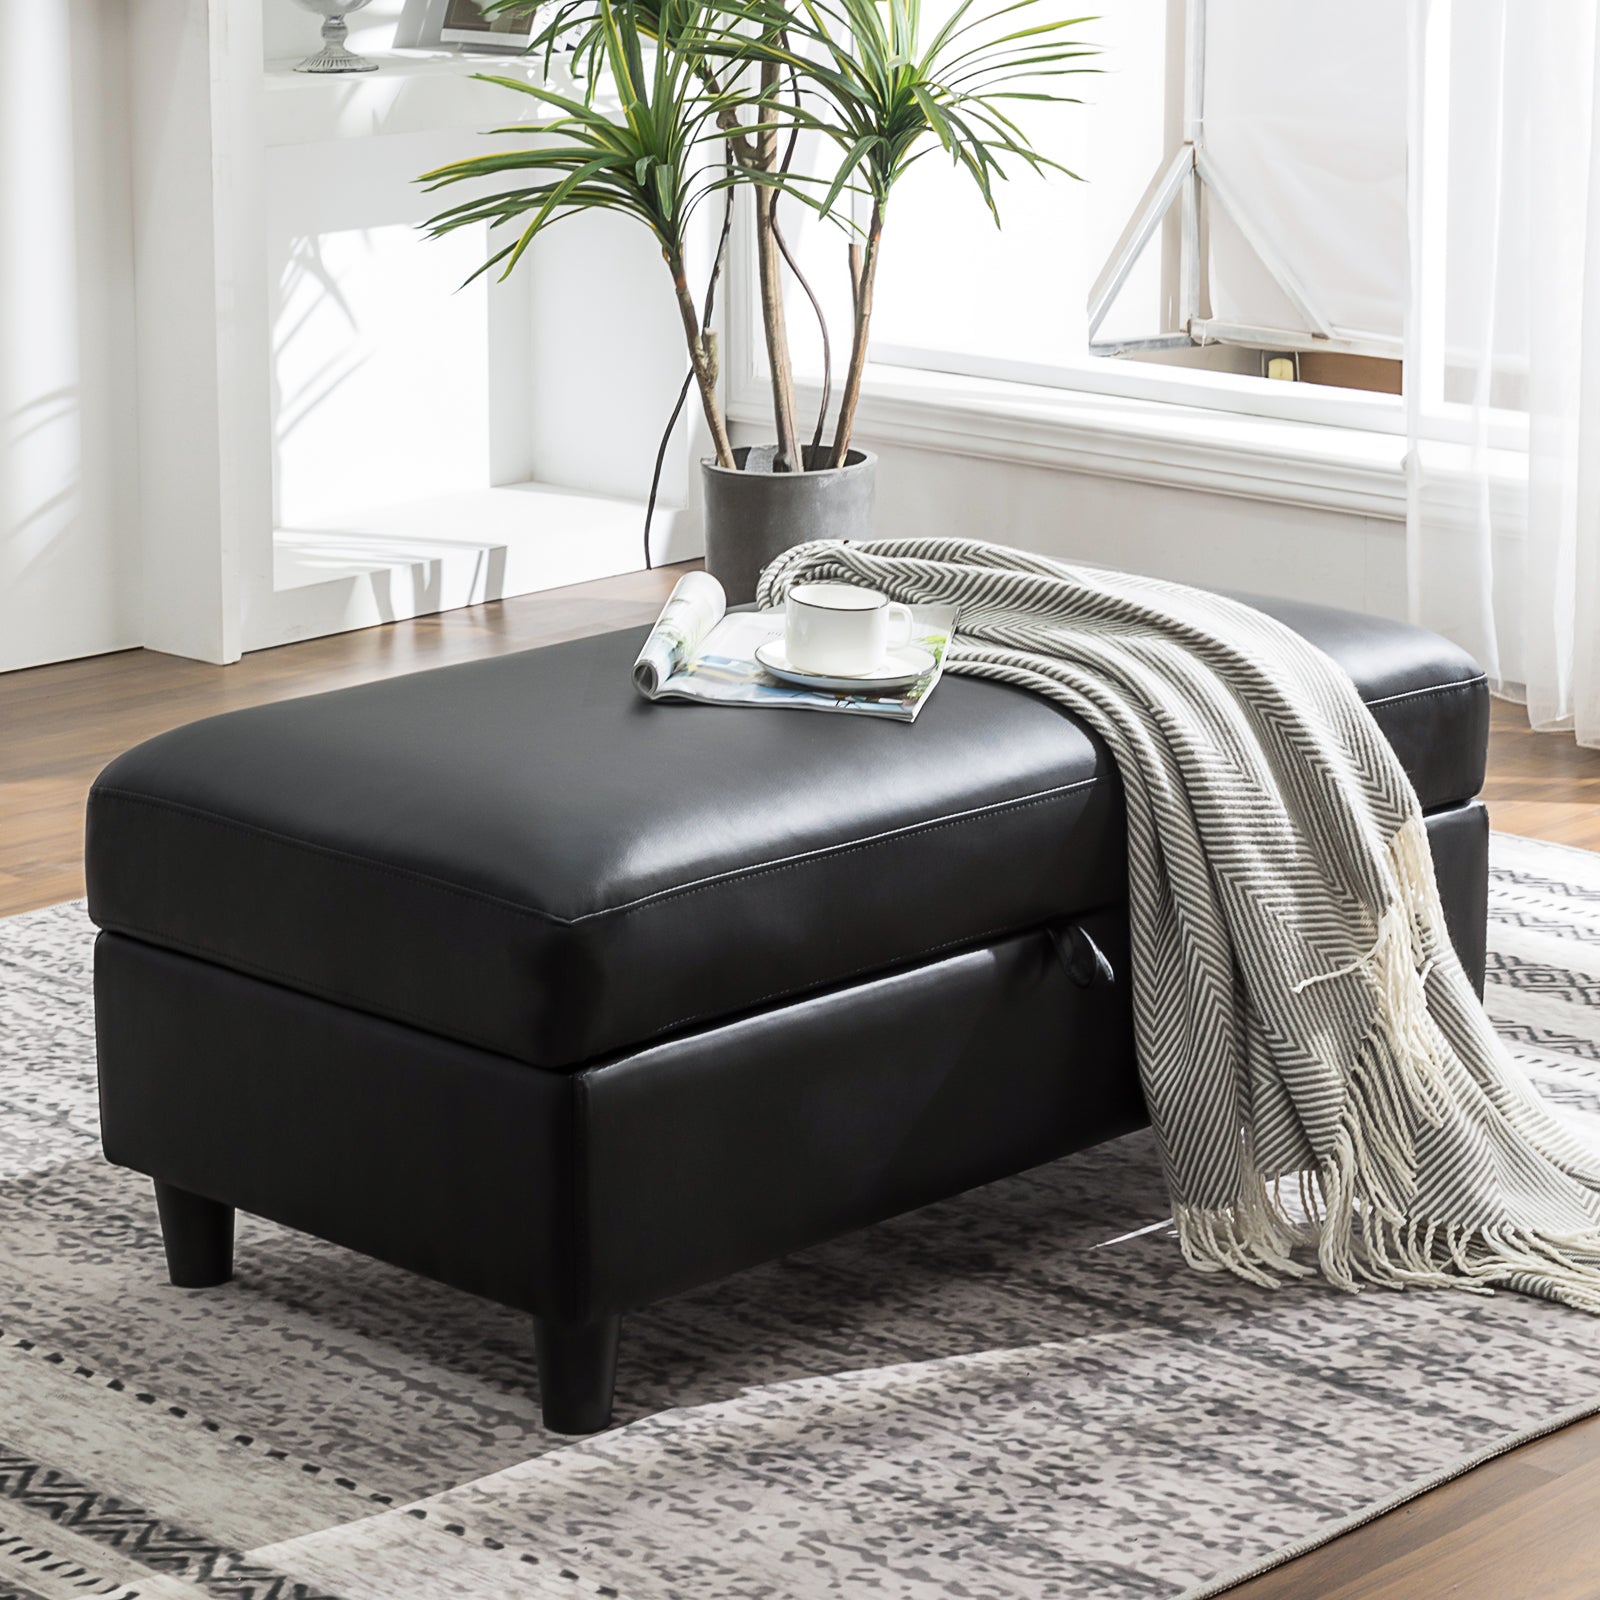 HONBAY Faux Leather Storage Bench